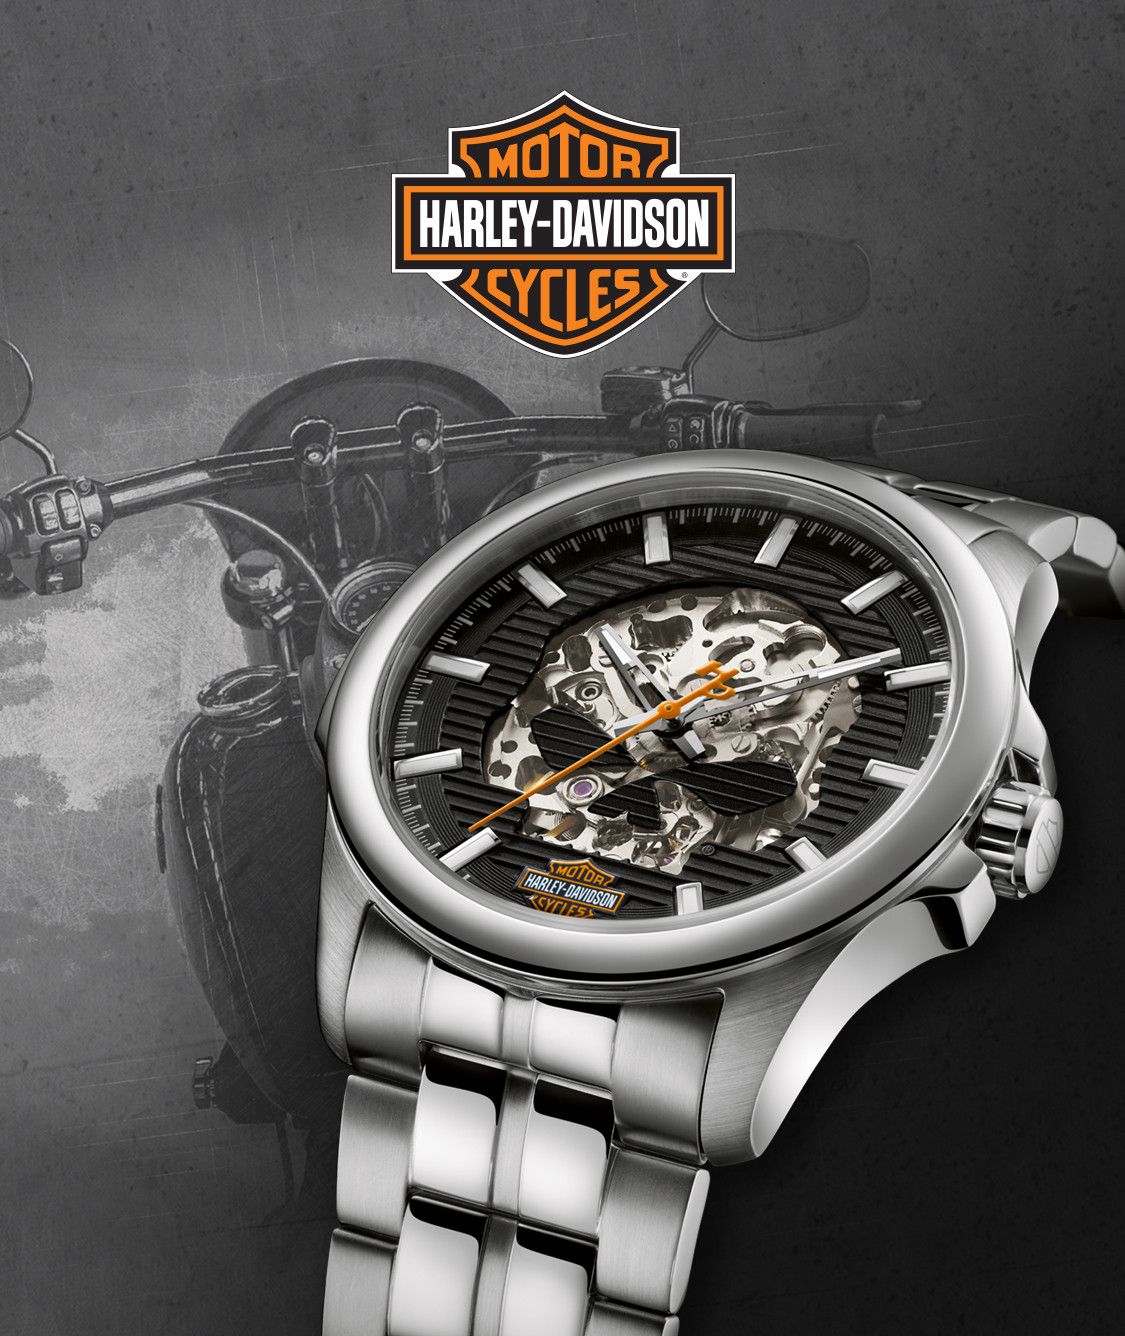 Bulova Harley Davidson Watch Online Discount Shop For Electronics Apparel Toys Books Games Computers Shoes Jewelry Watches Baby Products Sports Outdoors Office Products Bed Bath Furniture Tools Hardware Automotive